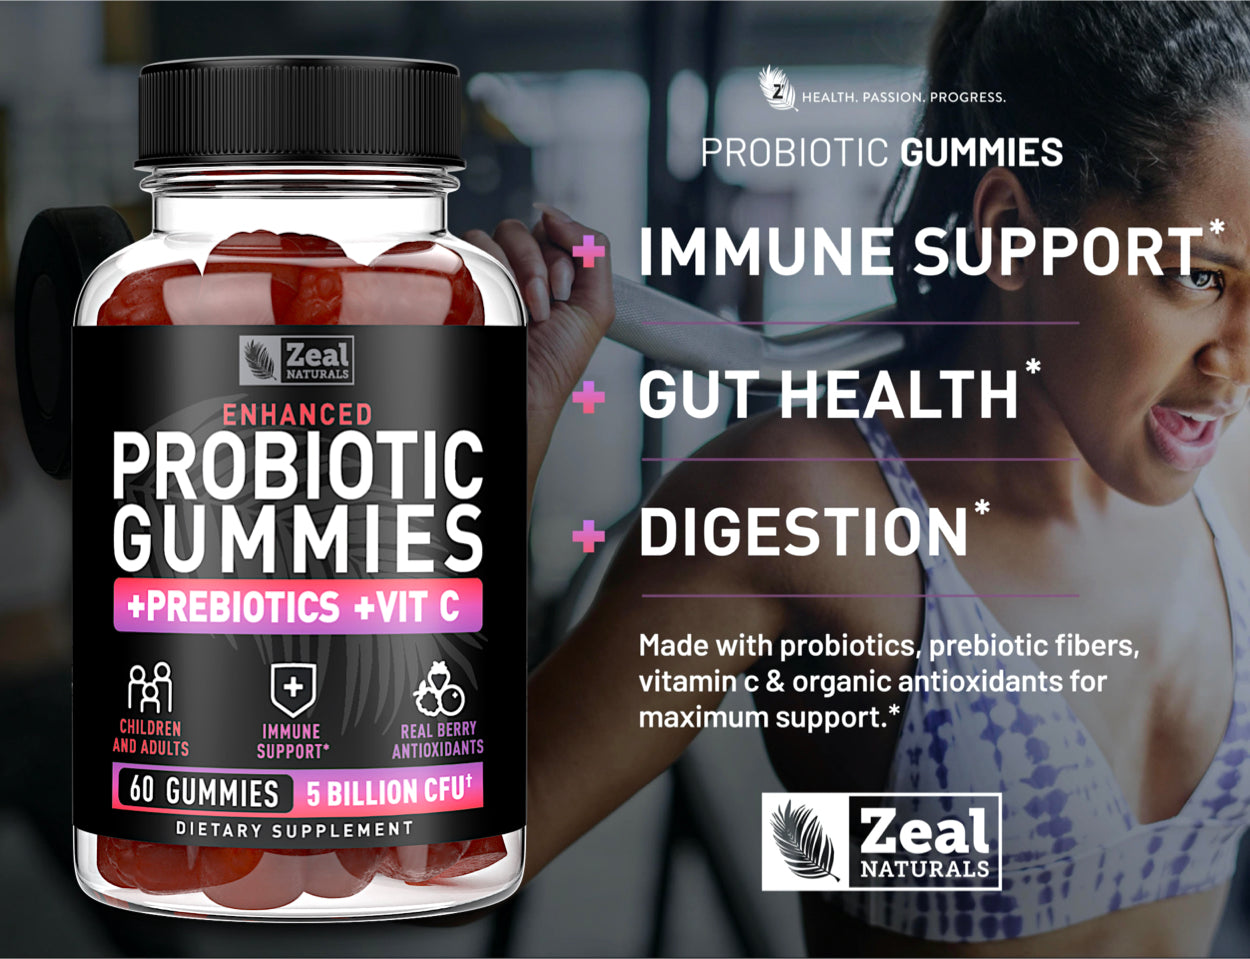 Probiotic Gummies for Adults and Kids - Zeal Naturals